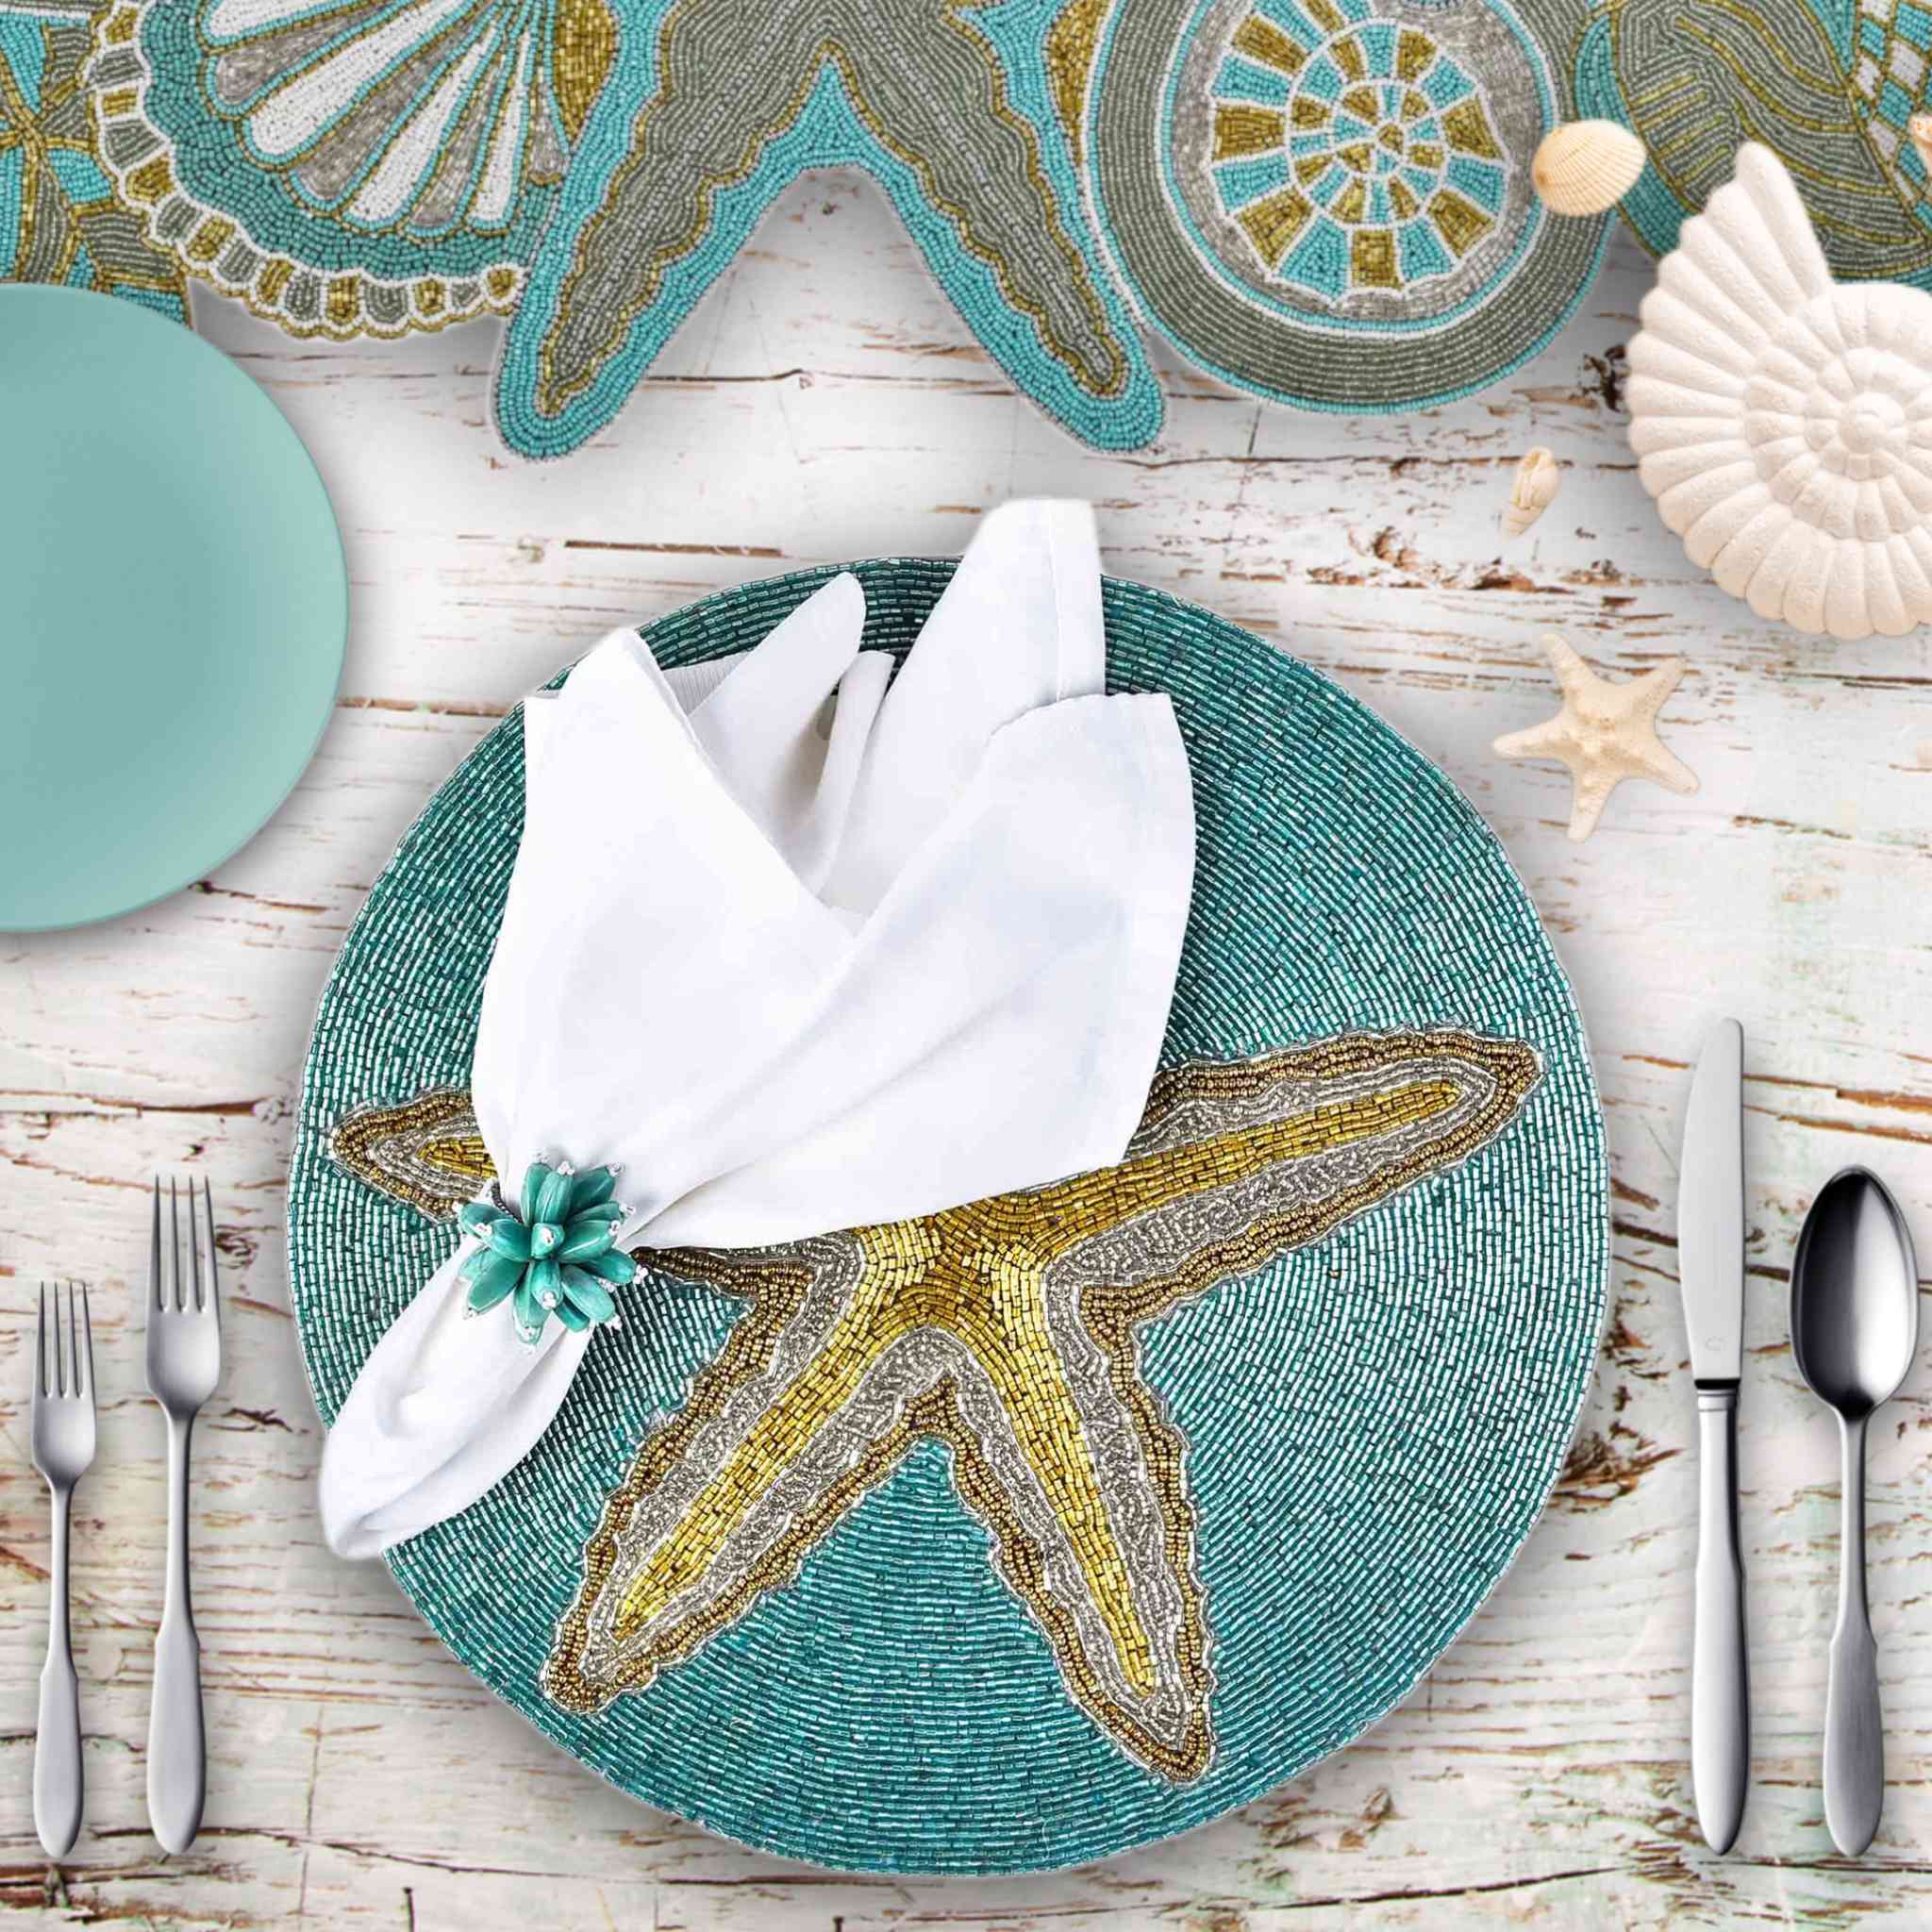 Ringo Star Fish Embroidered Placemat in Teal & Gold, Set of 2/4